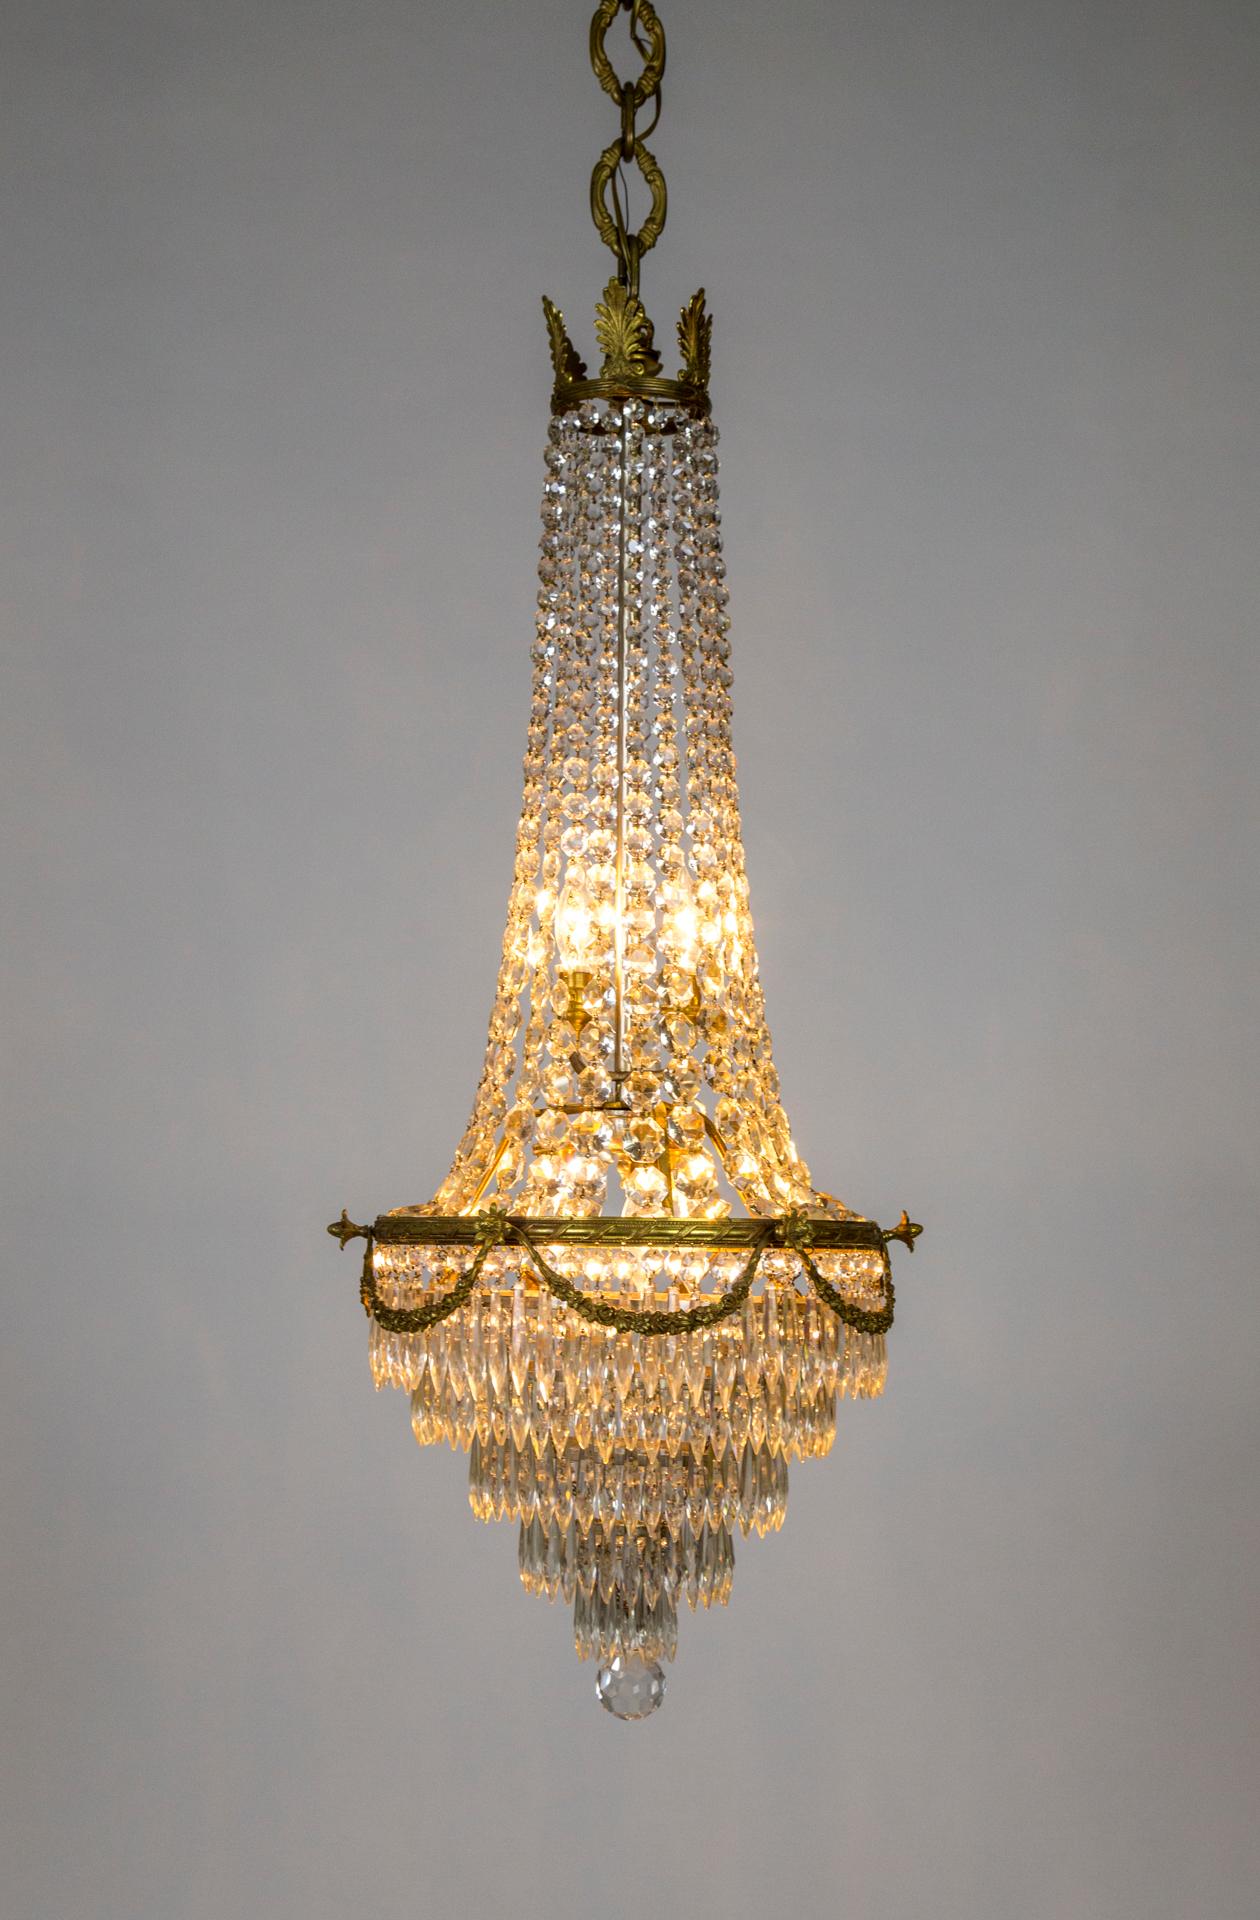 An oversized, slender, neoclassical style, gilded bronze and crystal chandelier, in tent-and-bag shape, with reeded ring and foliate swag detailing, and strands of heavy, crystal beaded drapes from ring to crown. It has 5-light, 3 illuminating the